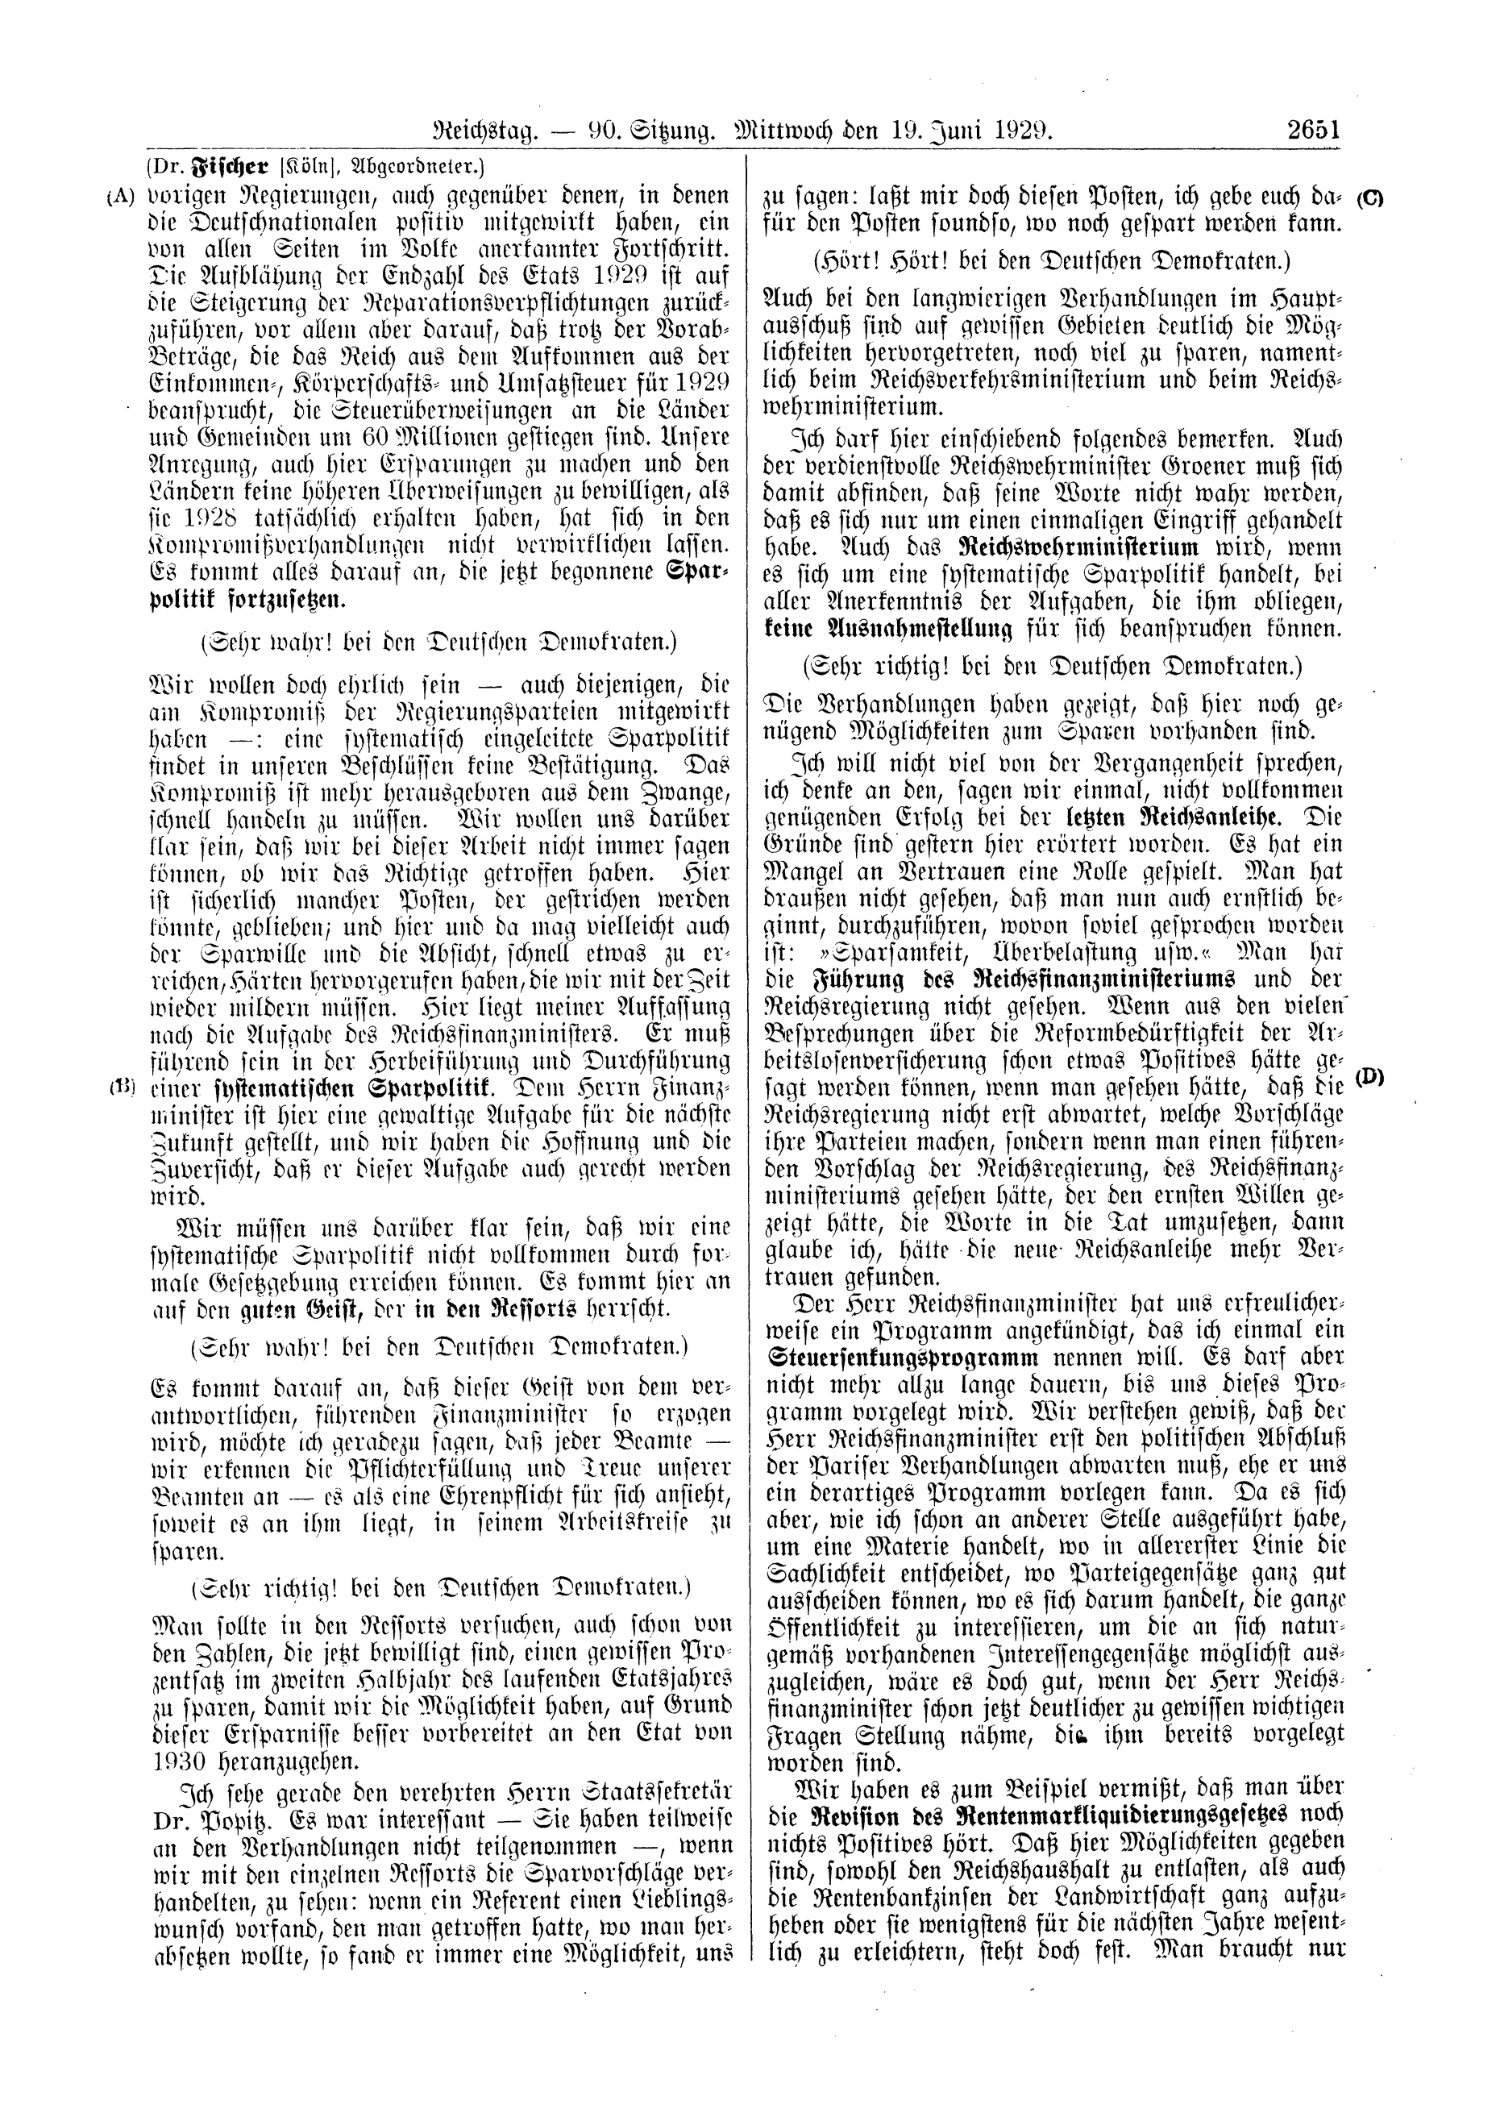 Scan of page 2651